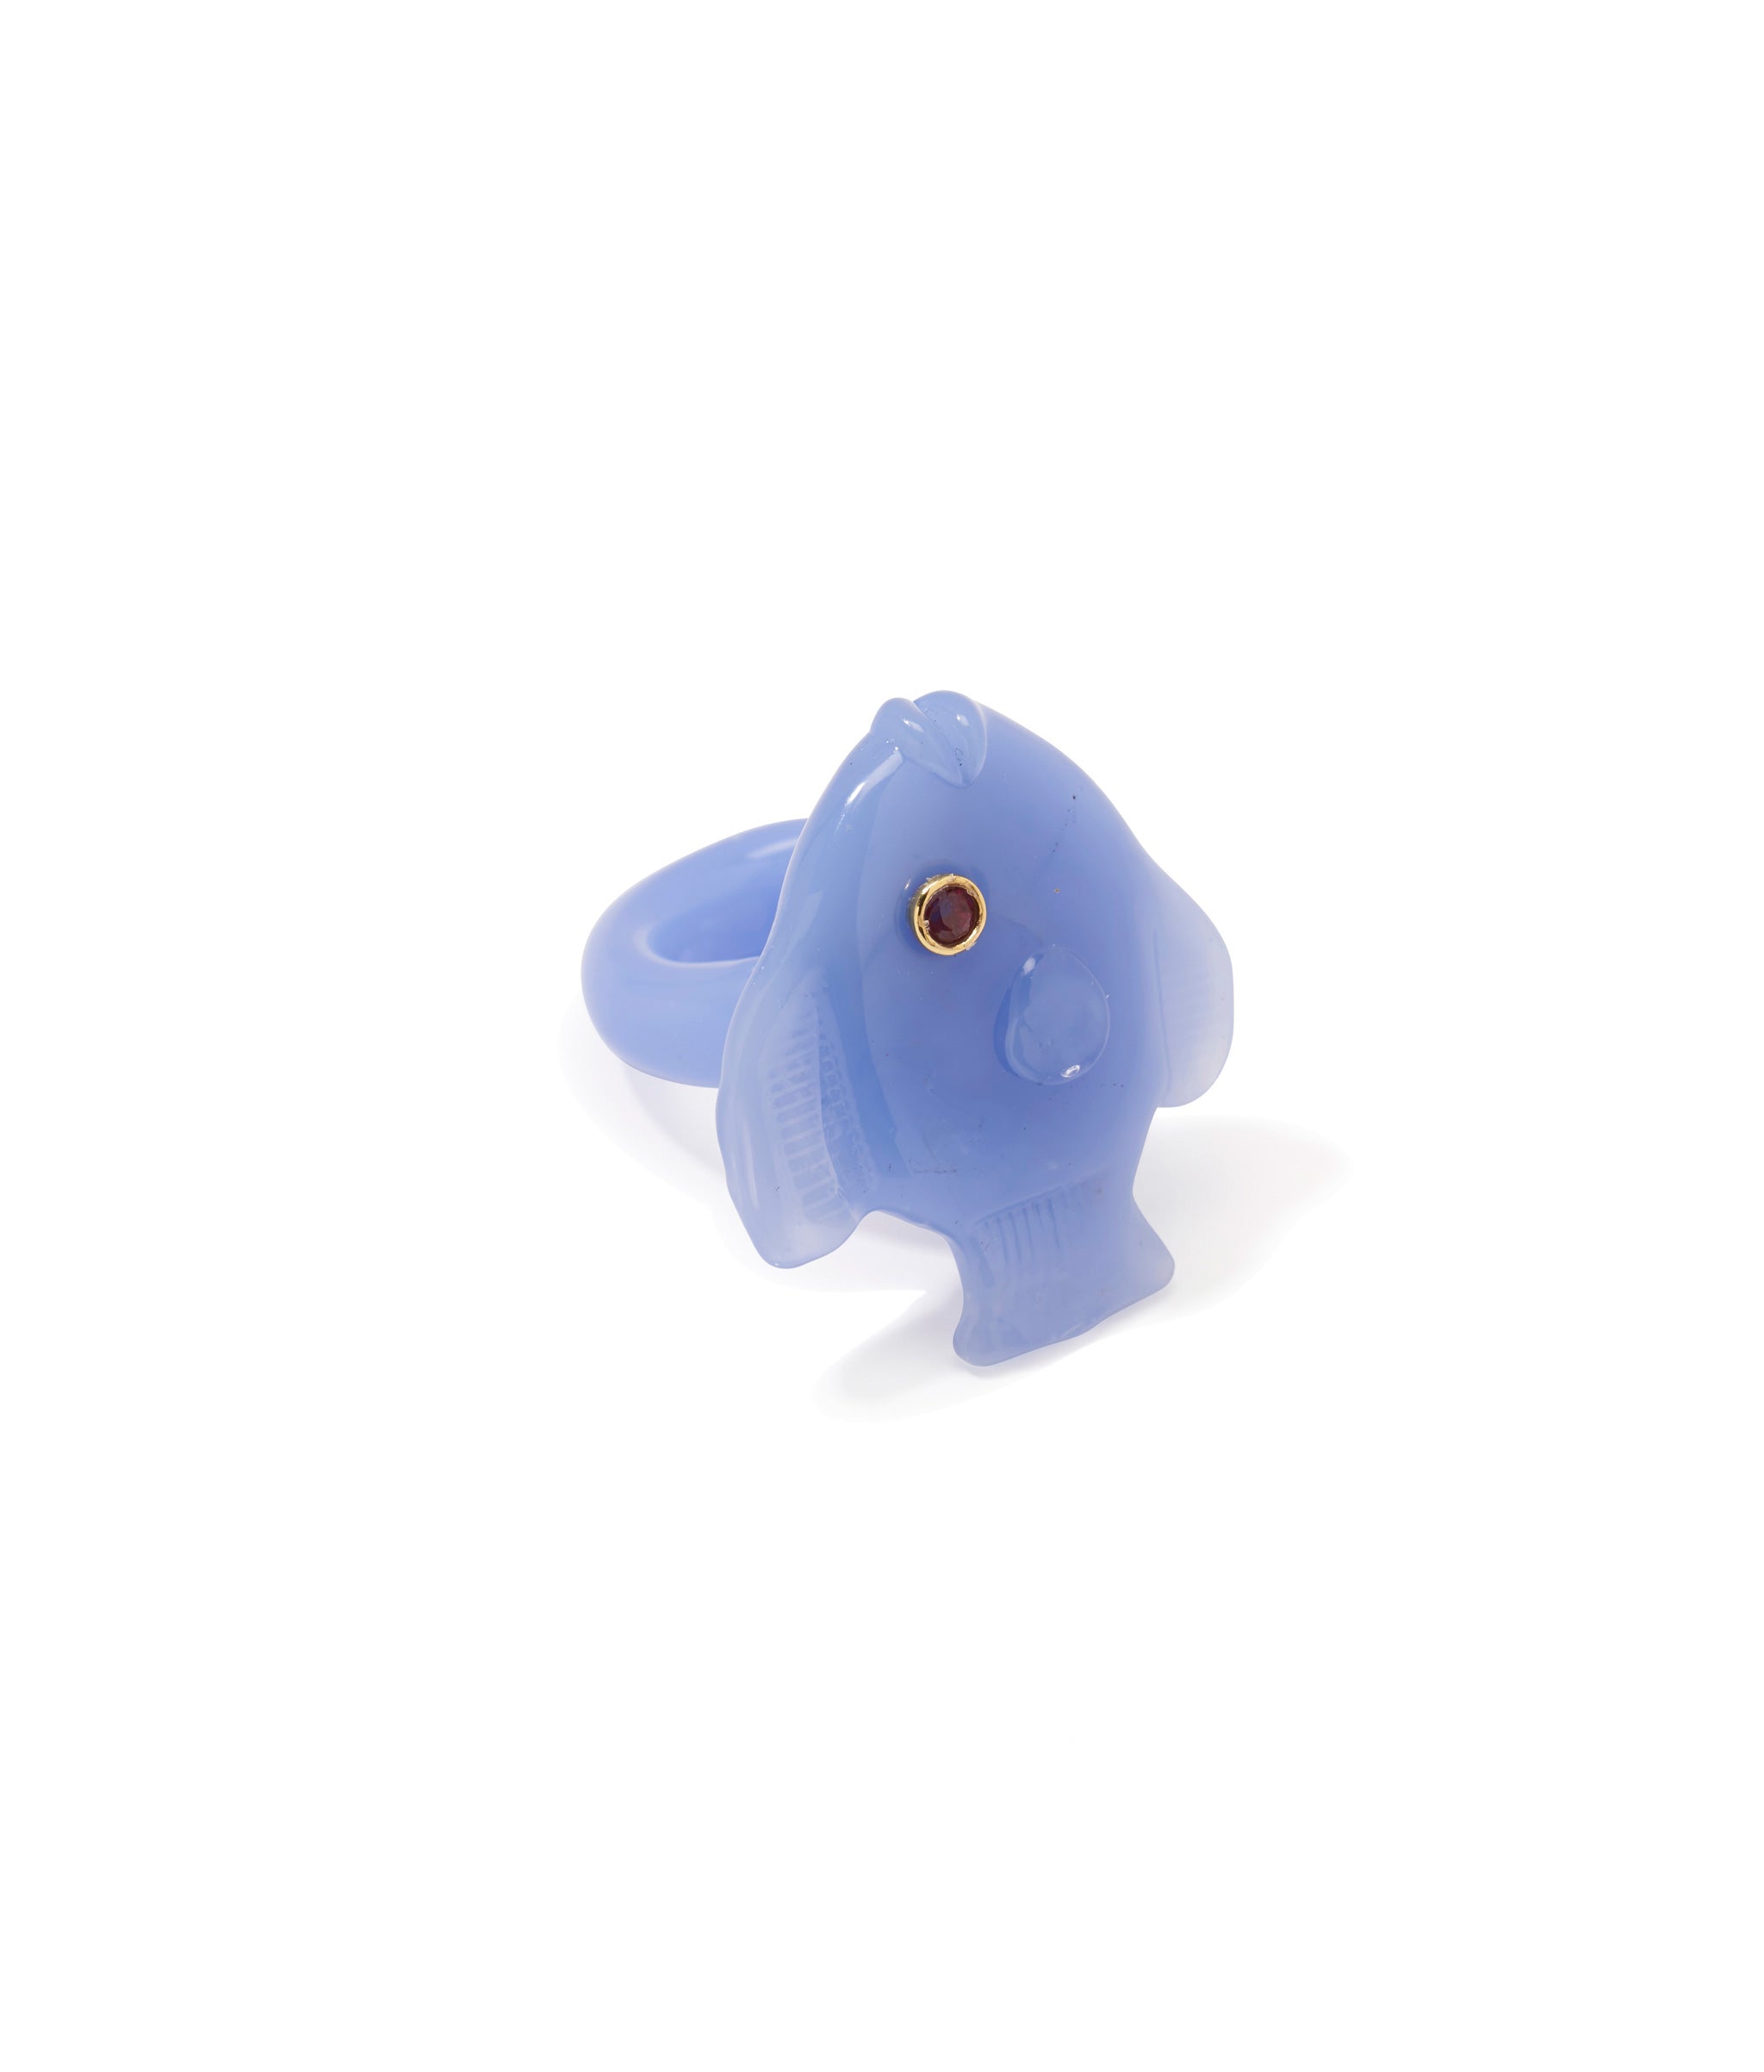 Pescado Ring. Periwinkle blue hand-blown glass fish ring, set with faceted rhodolite stone.